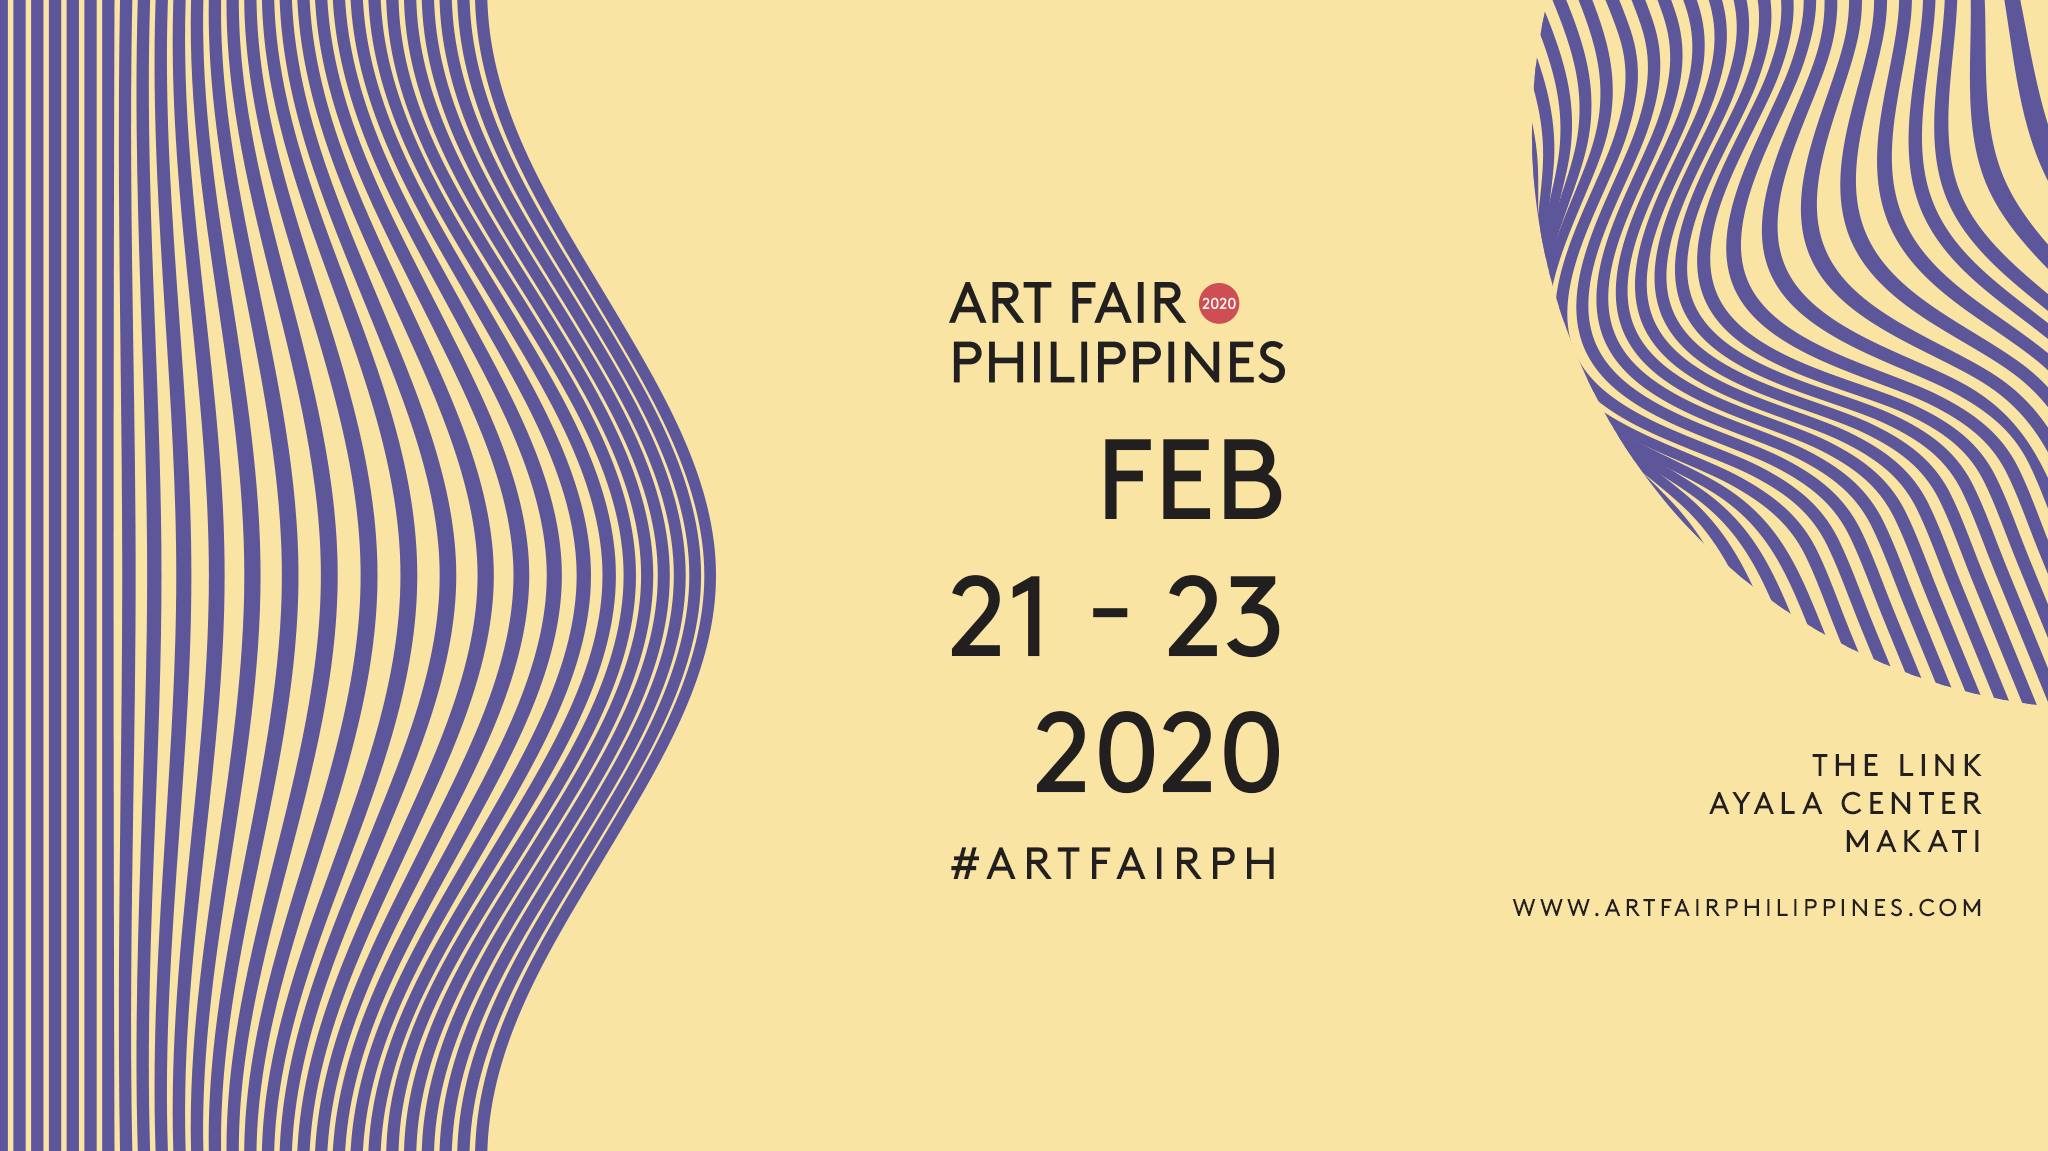 Films, workshops, and spaces you can lose yourself in: all the new things you can expect from Art Fair Philippines 2020